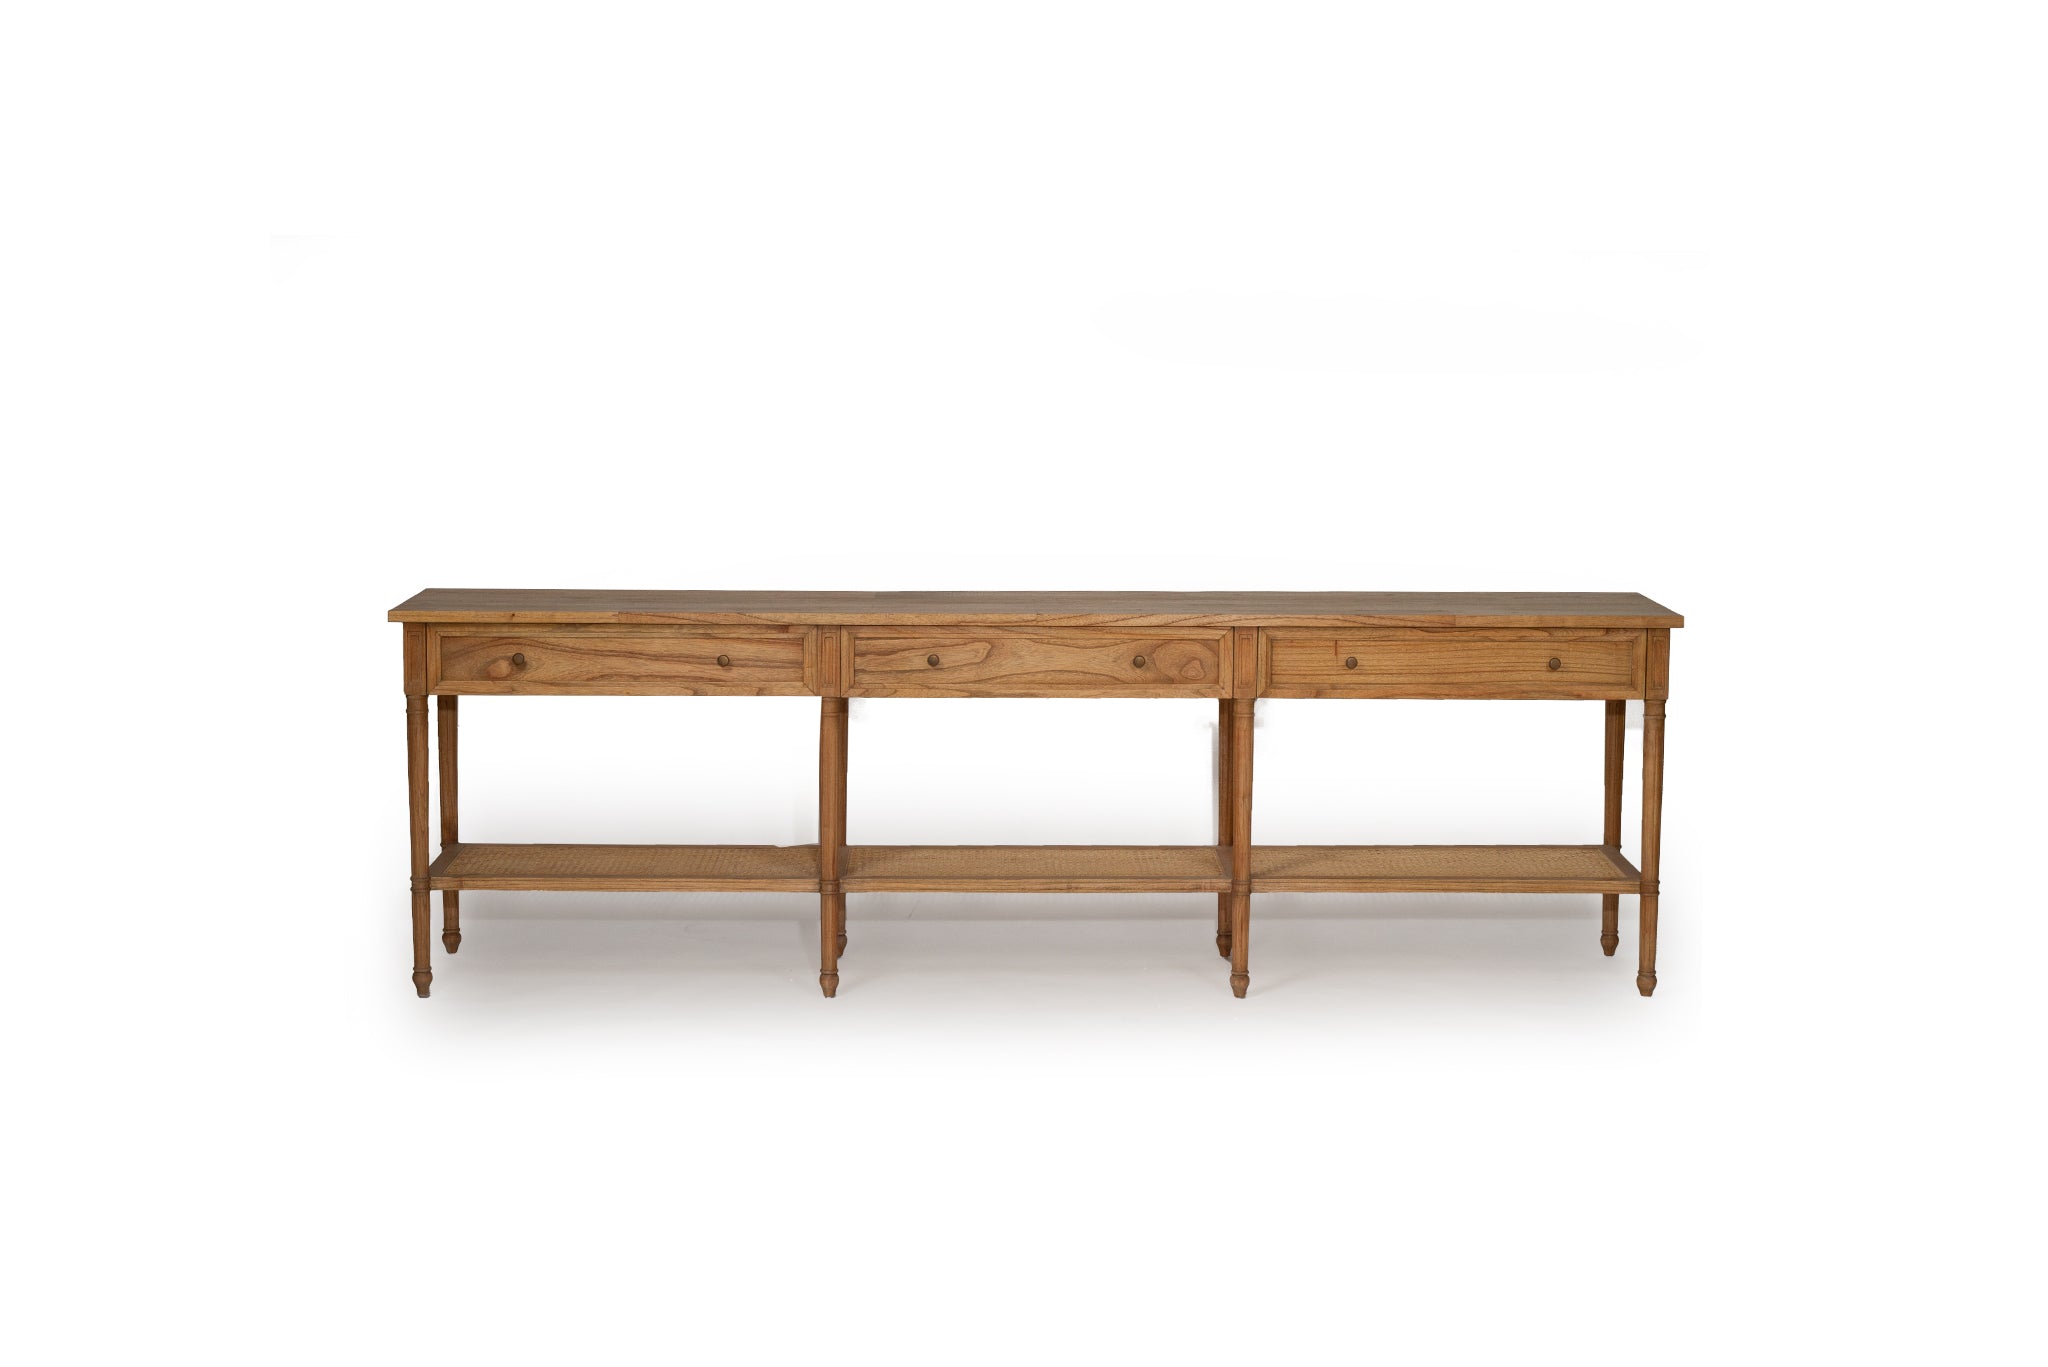 Vaucluse Mahogany & Rattan Wide Console Table – Weathered Oak – 280cm